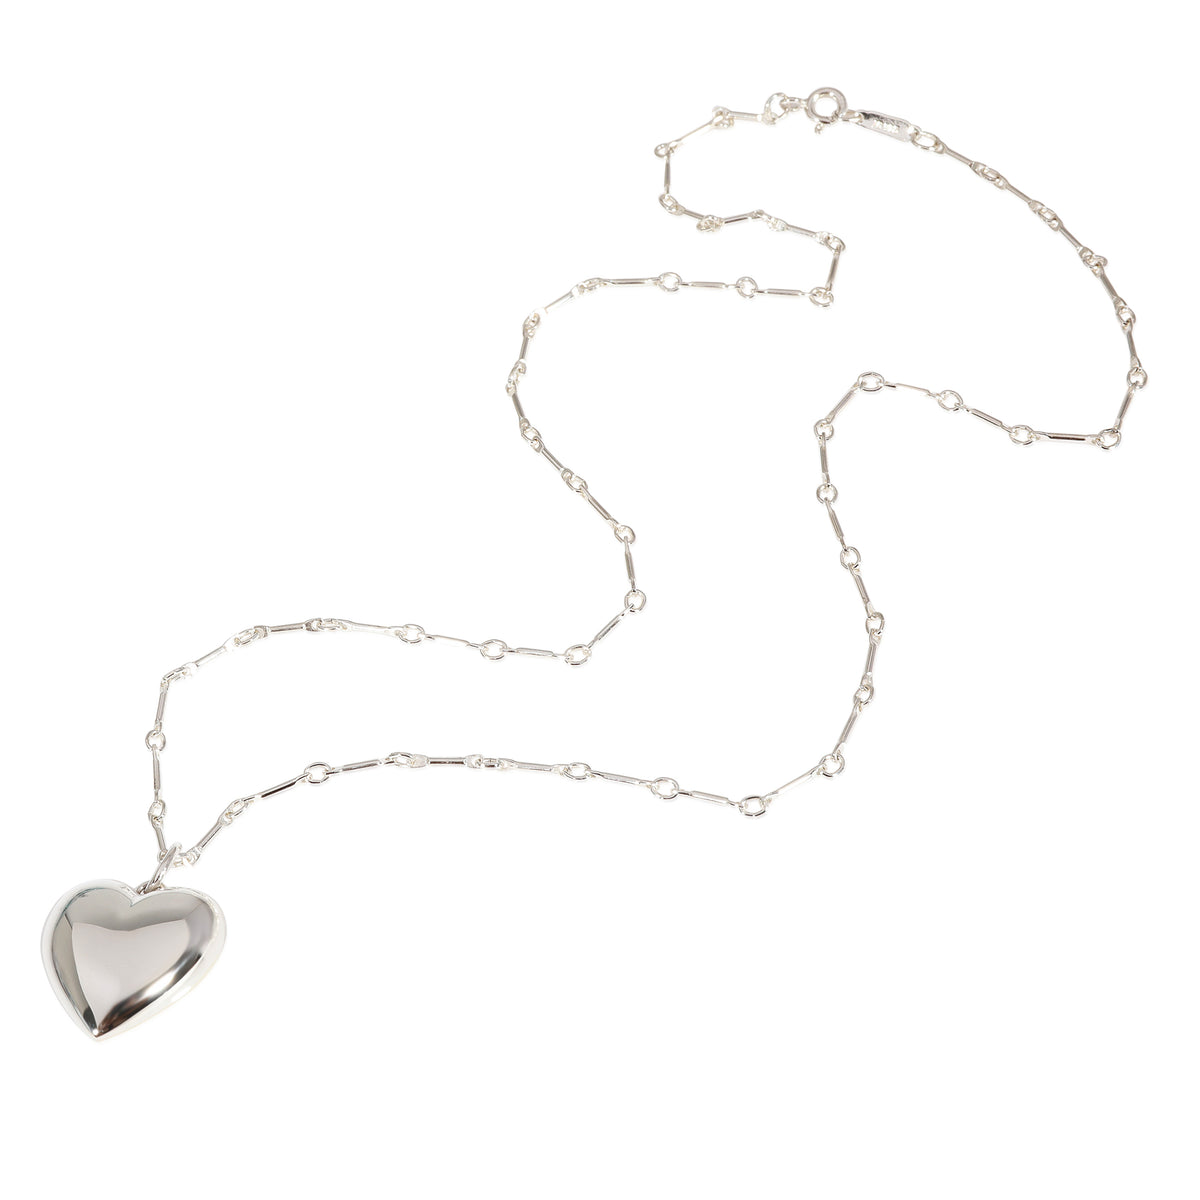 Tiffany & Co. Vintage Puffy Heart On Chain in Sterling Silver